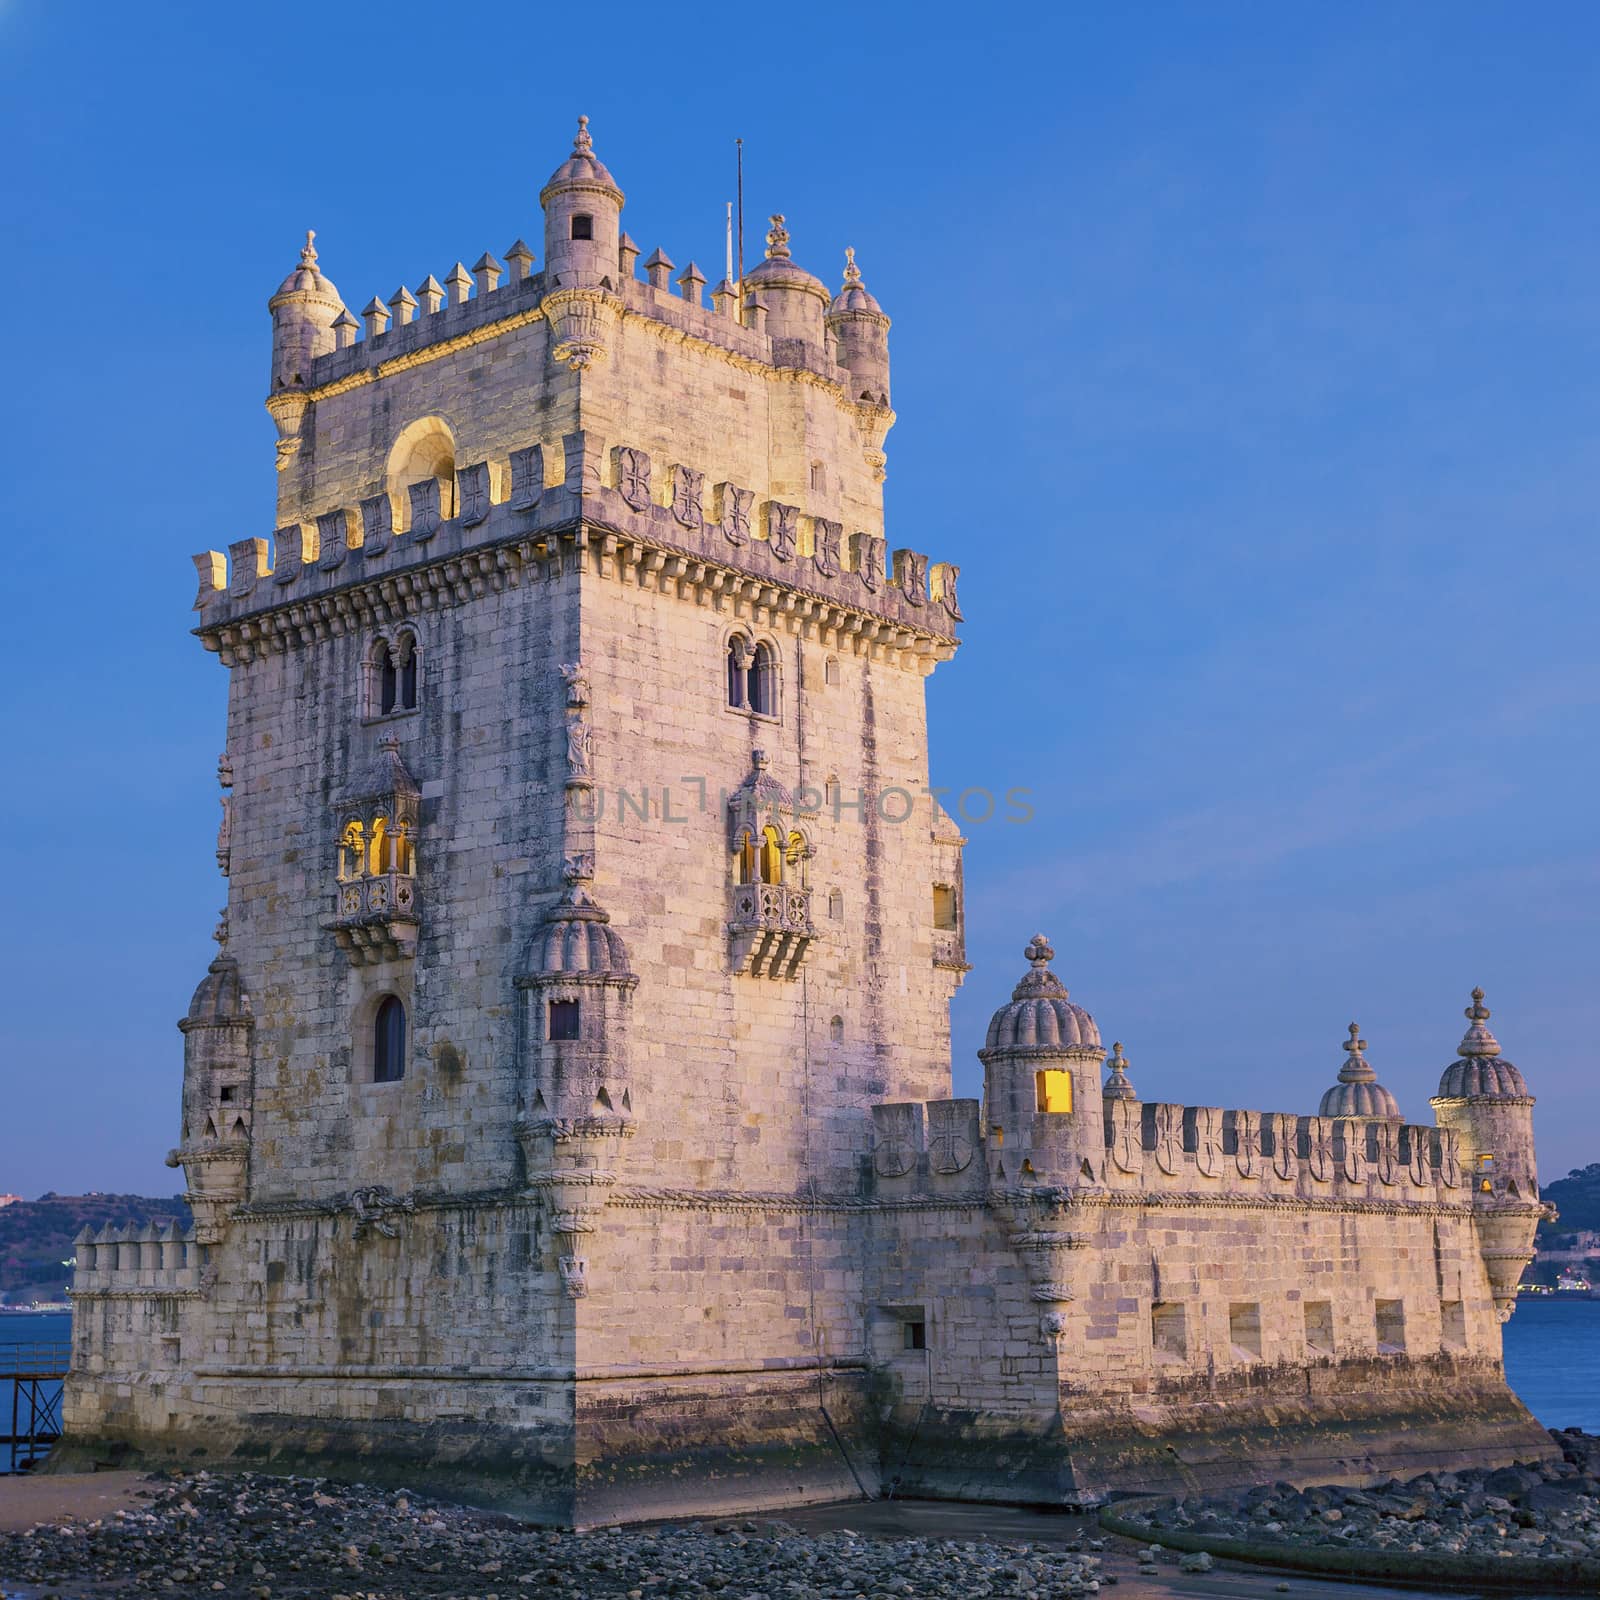 Belem tower at sunset by vwalakte